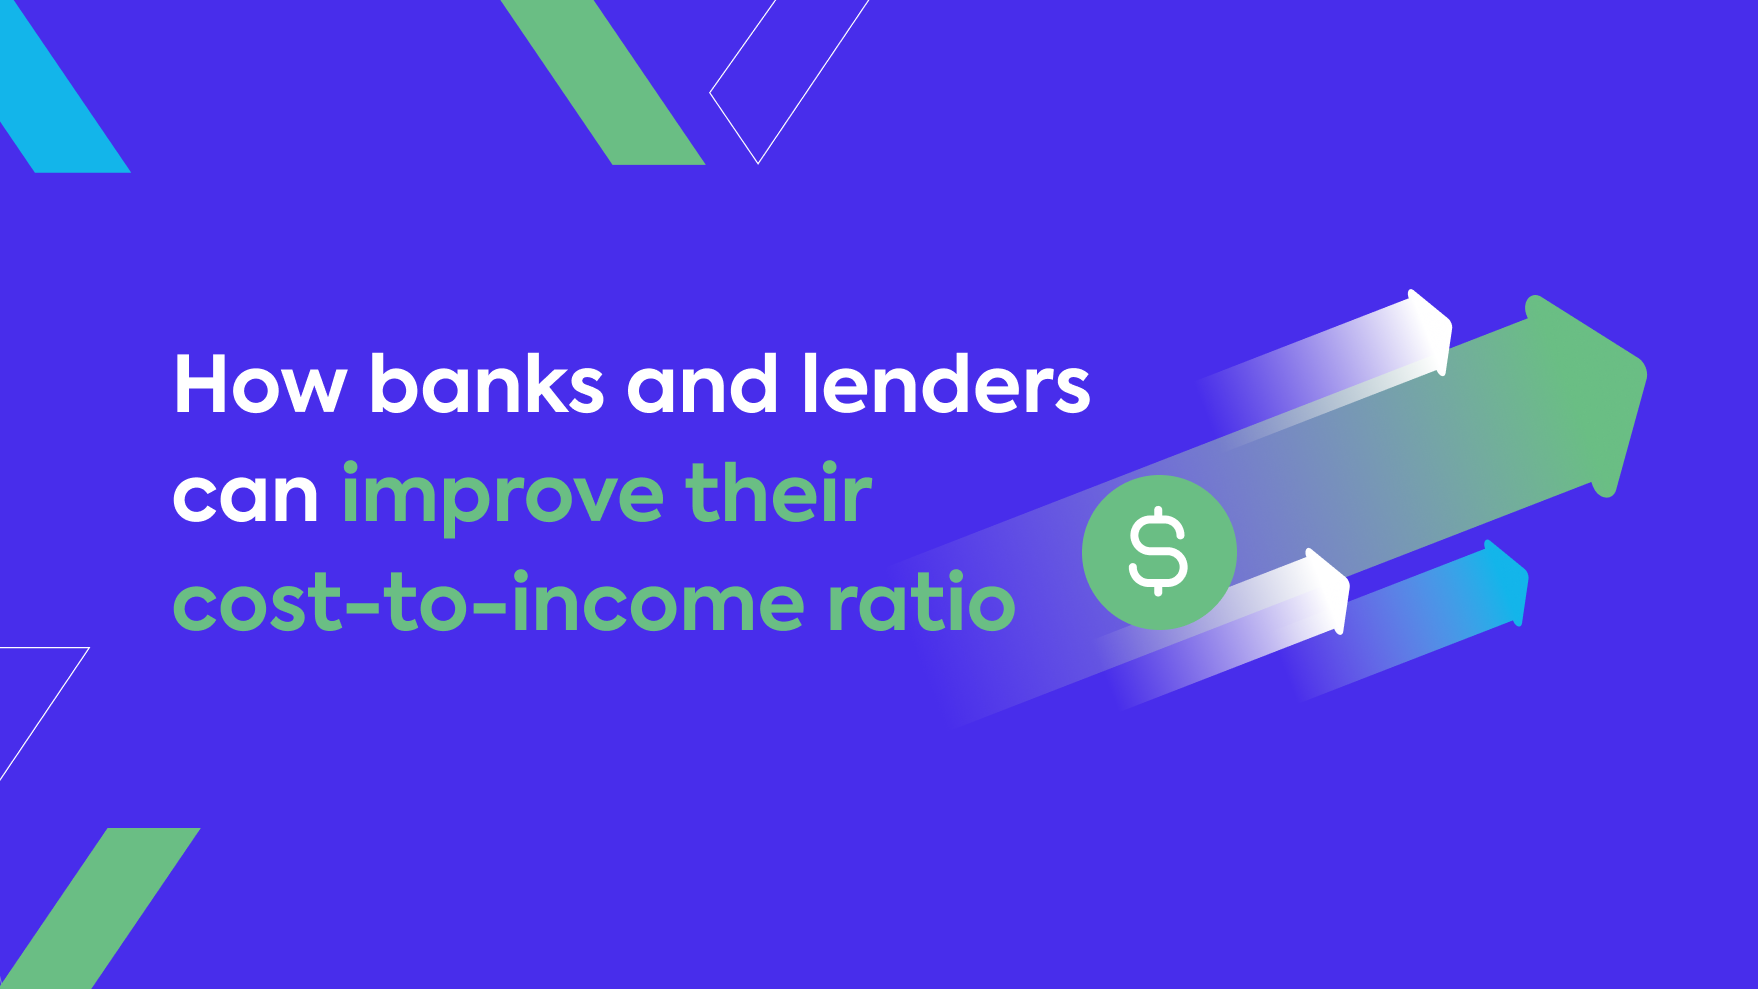 How banks and lenders can improve their cost-to-income ratio